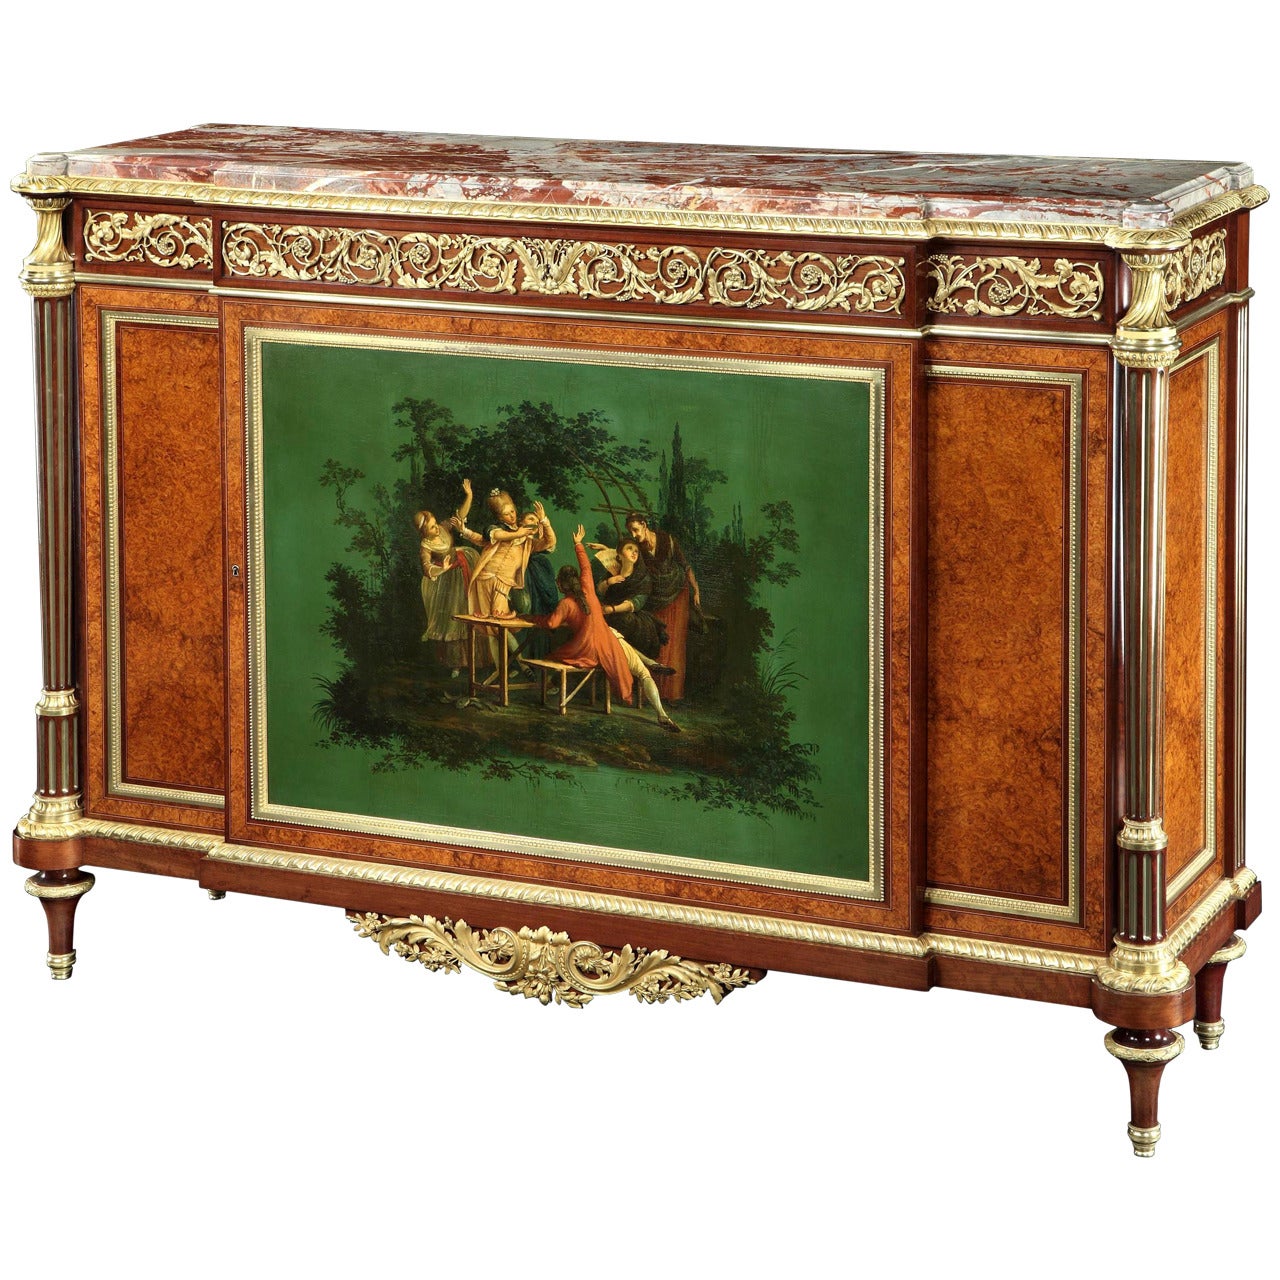 French Side Cabinet with Court Scene in Vernis Martin by Henry Dasson